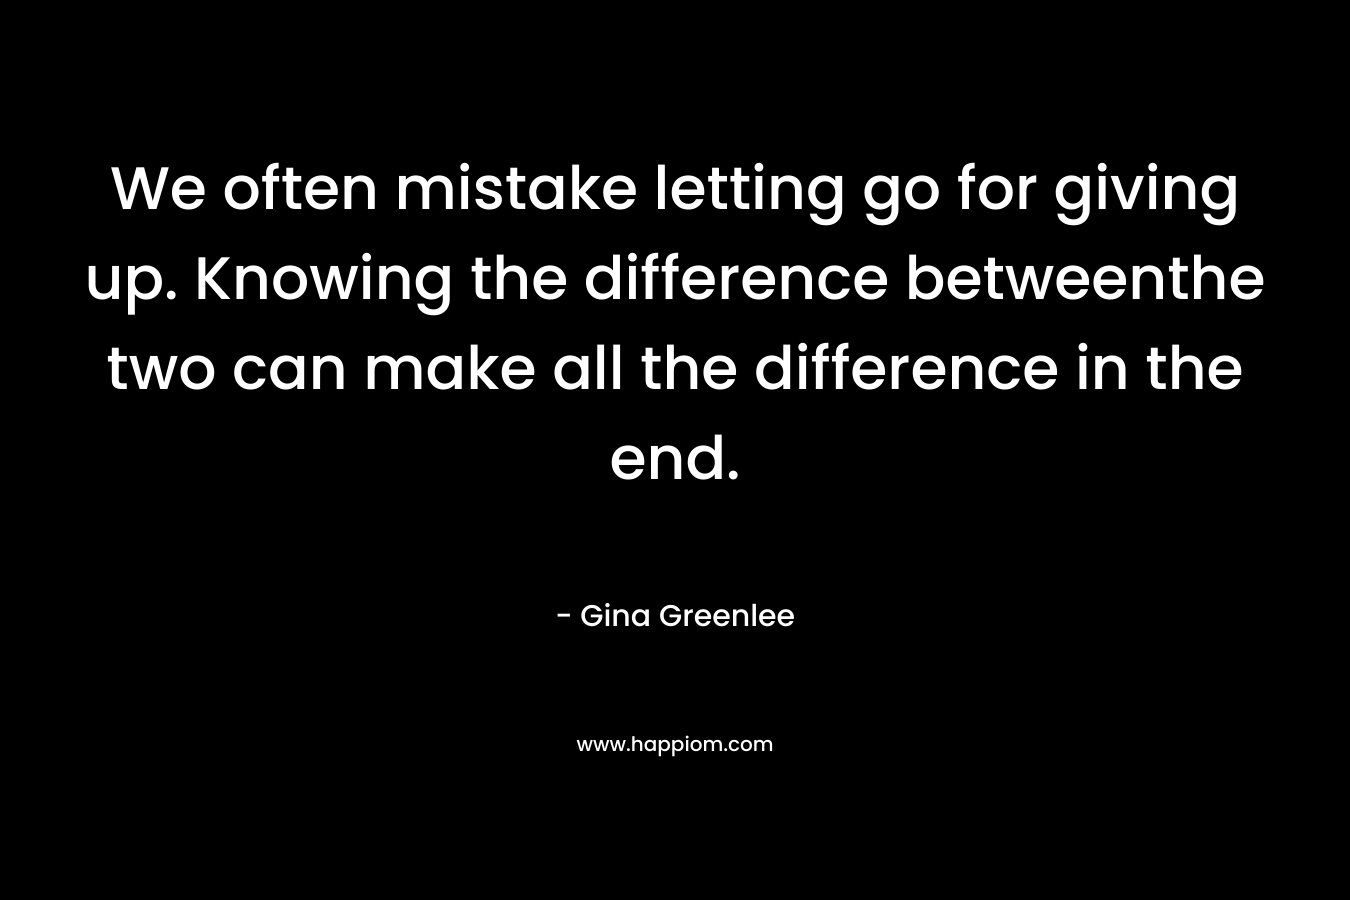 We often mistake letting go for giving up. Knowing the difference betweenthe two can make all the difference in the end. – Gina Greenlee